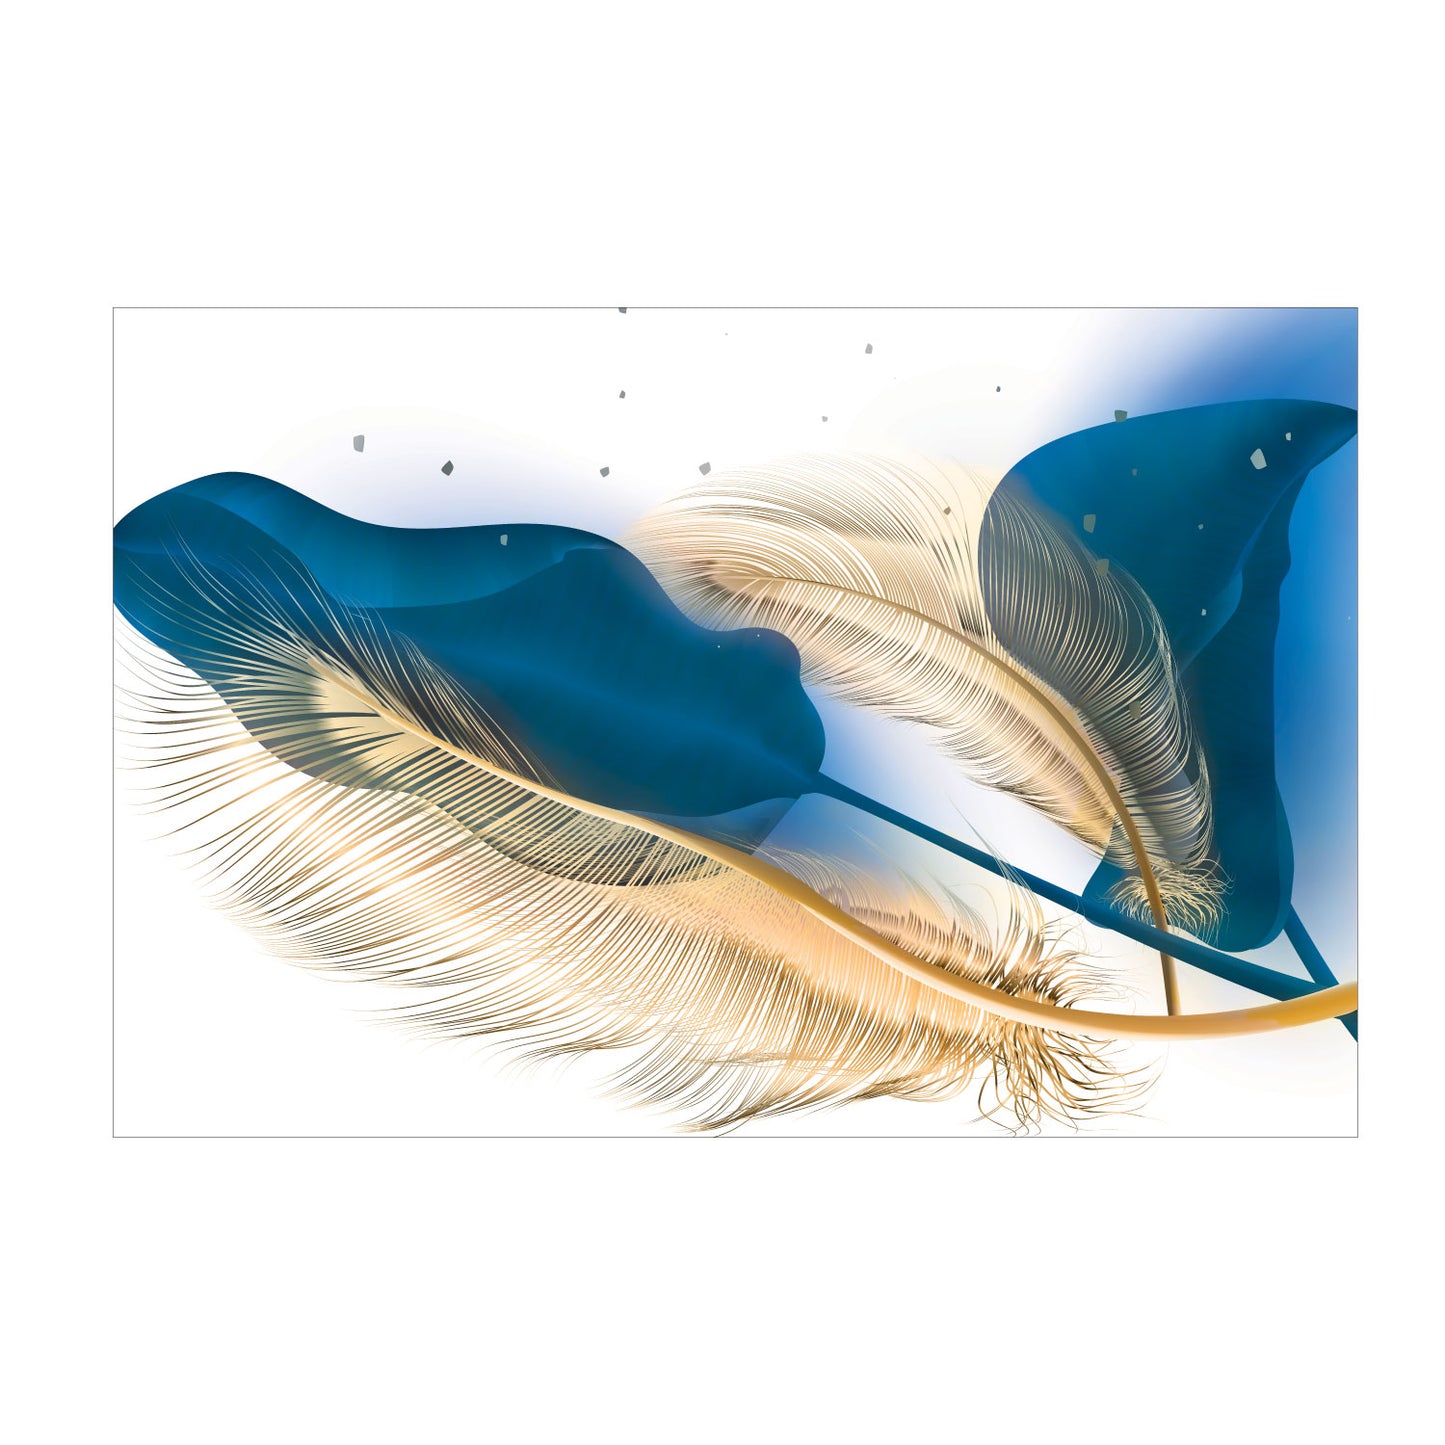 LEAVES Turquoise, Gold Feather Modern Wall Art